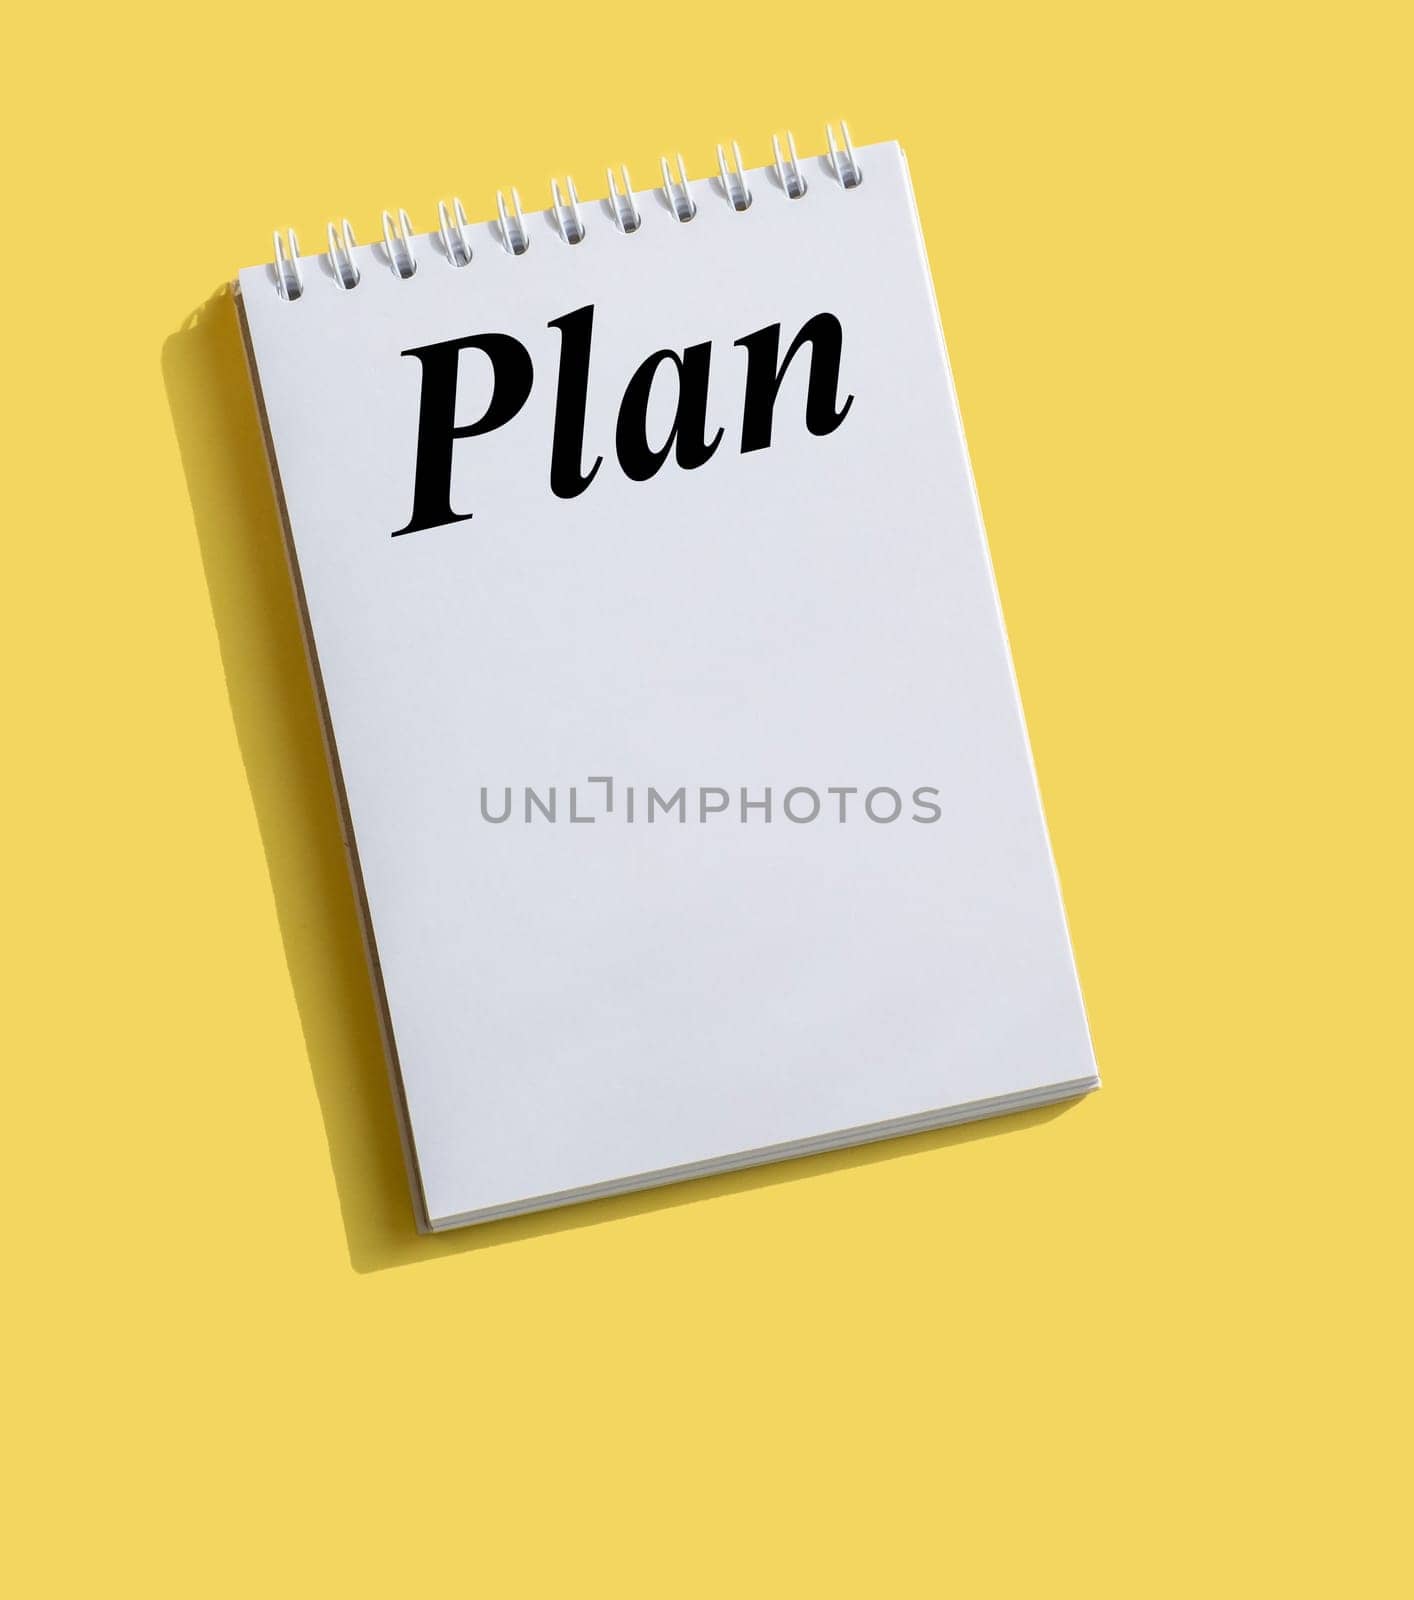 Inscription PLAN written on note paper on a bright yellow background by AnatoliiFoto